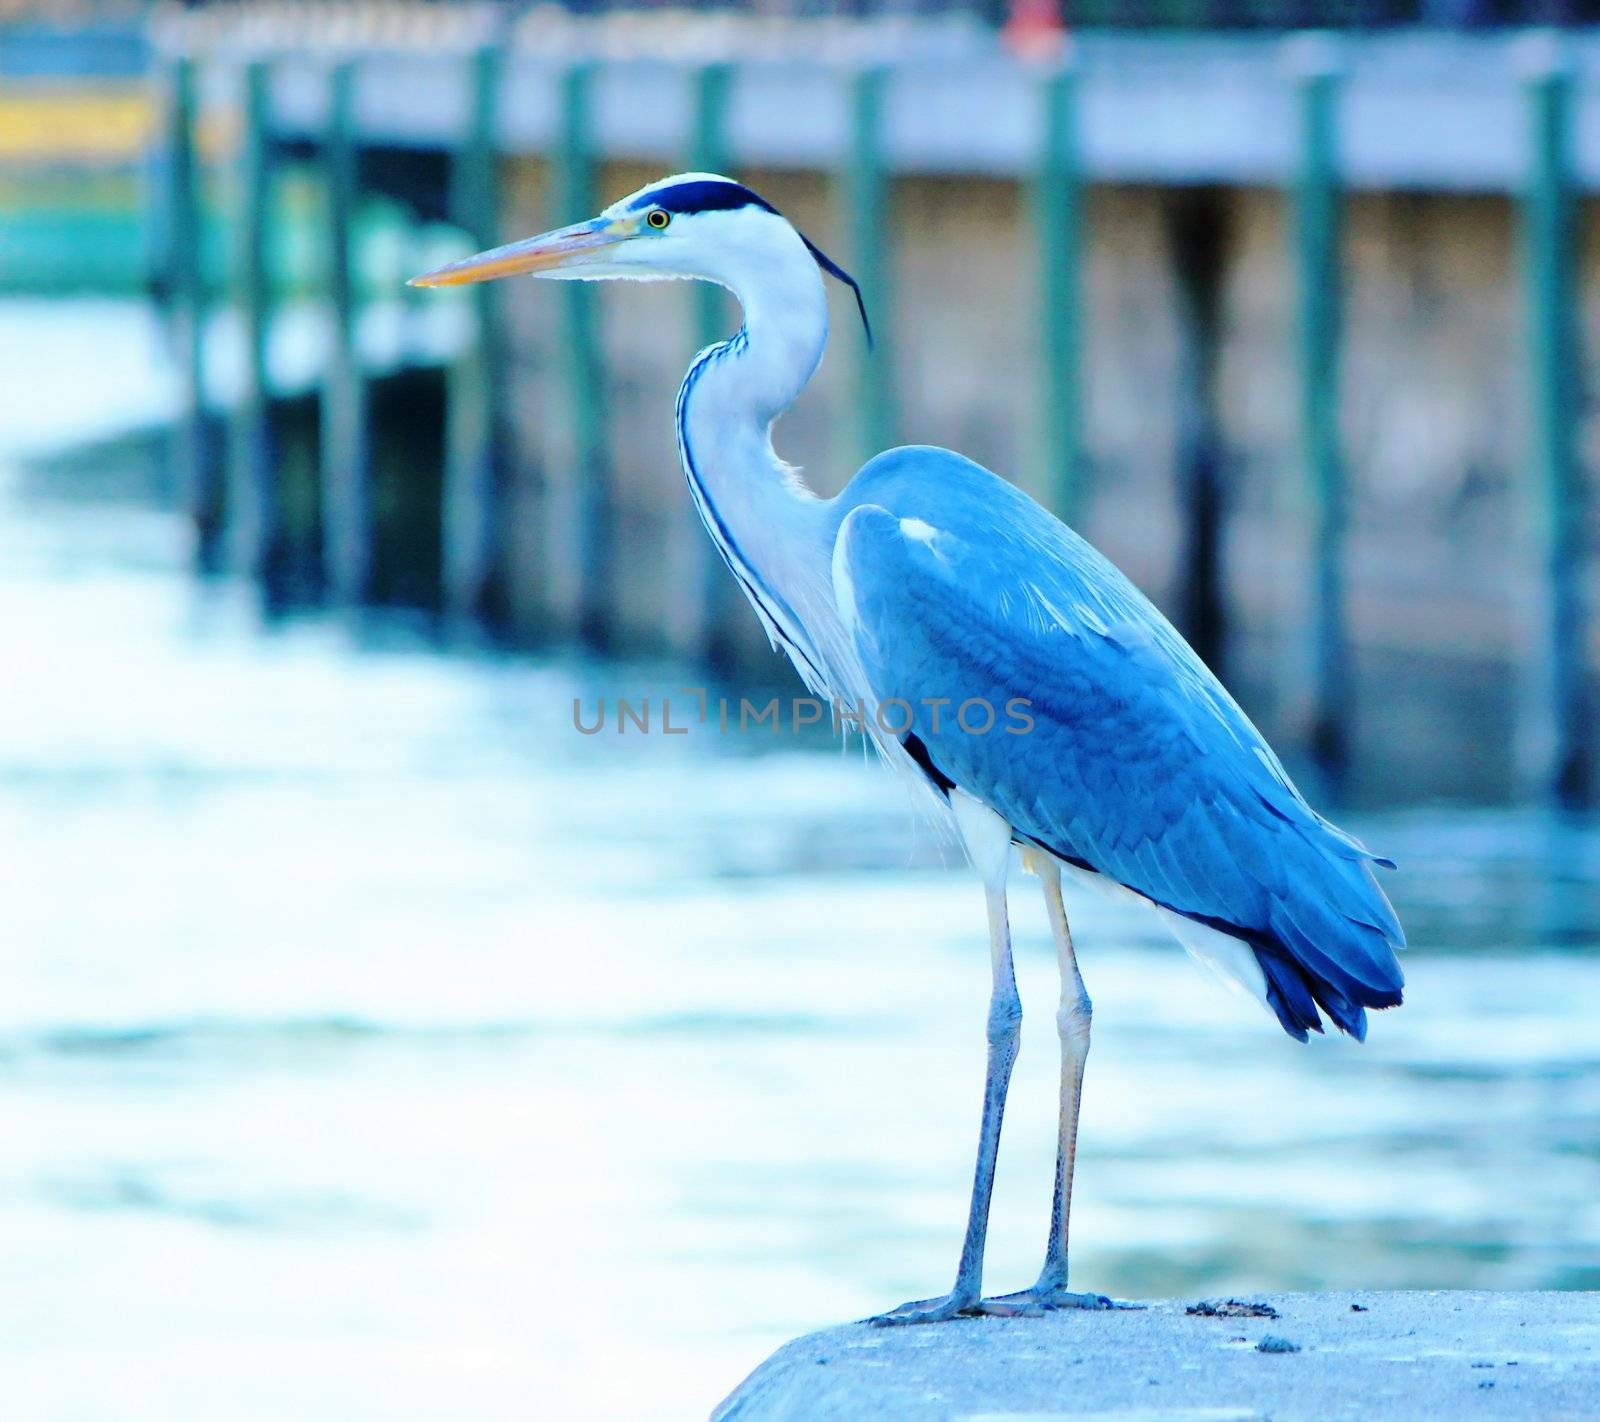 Great blue heron standing on a wall in the city near the river